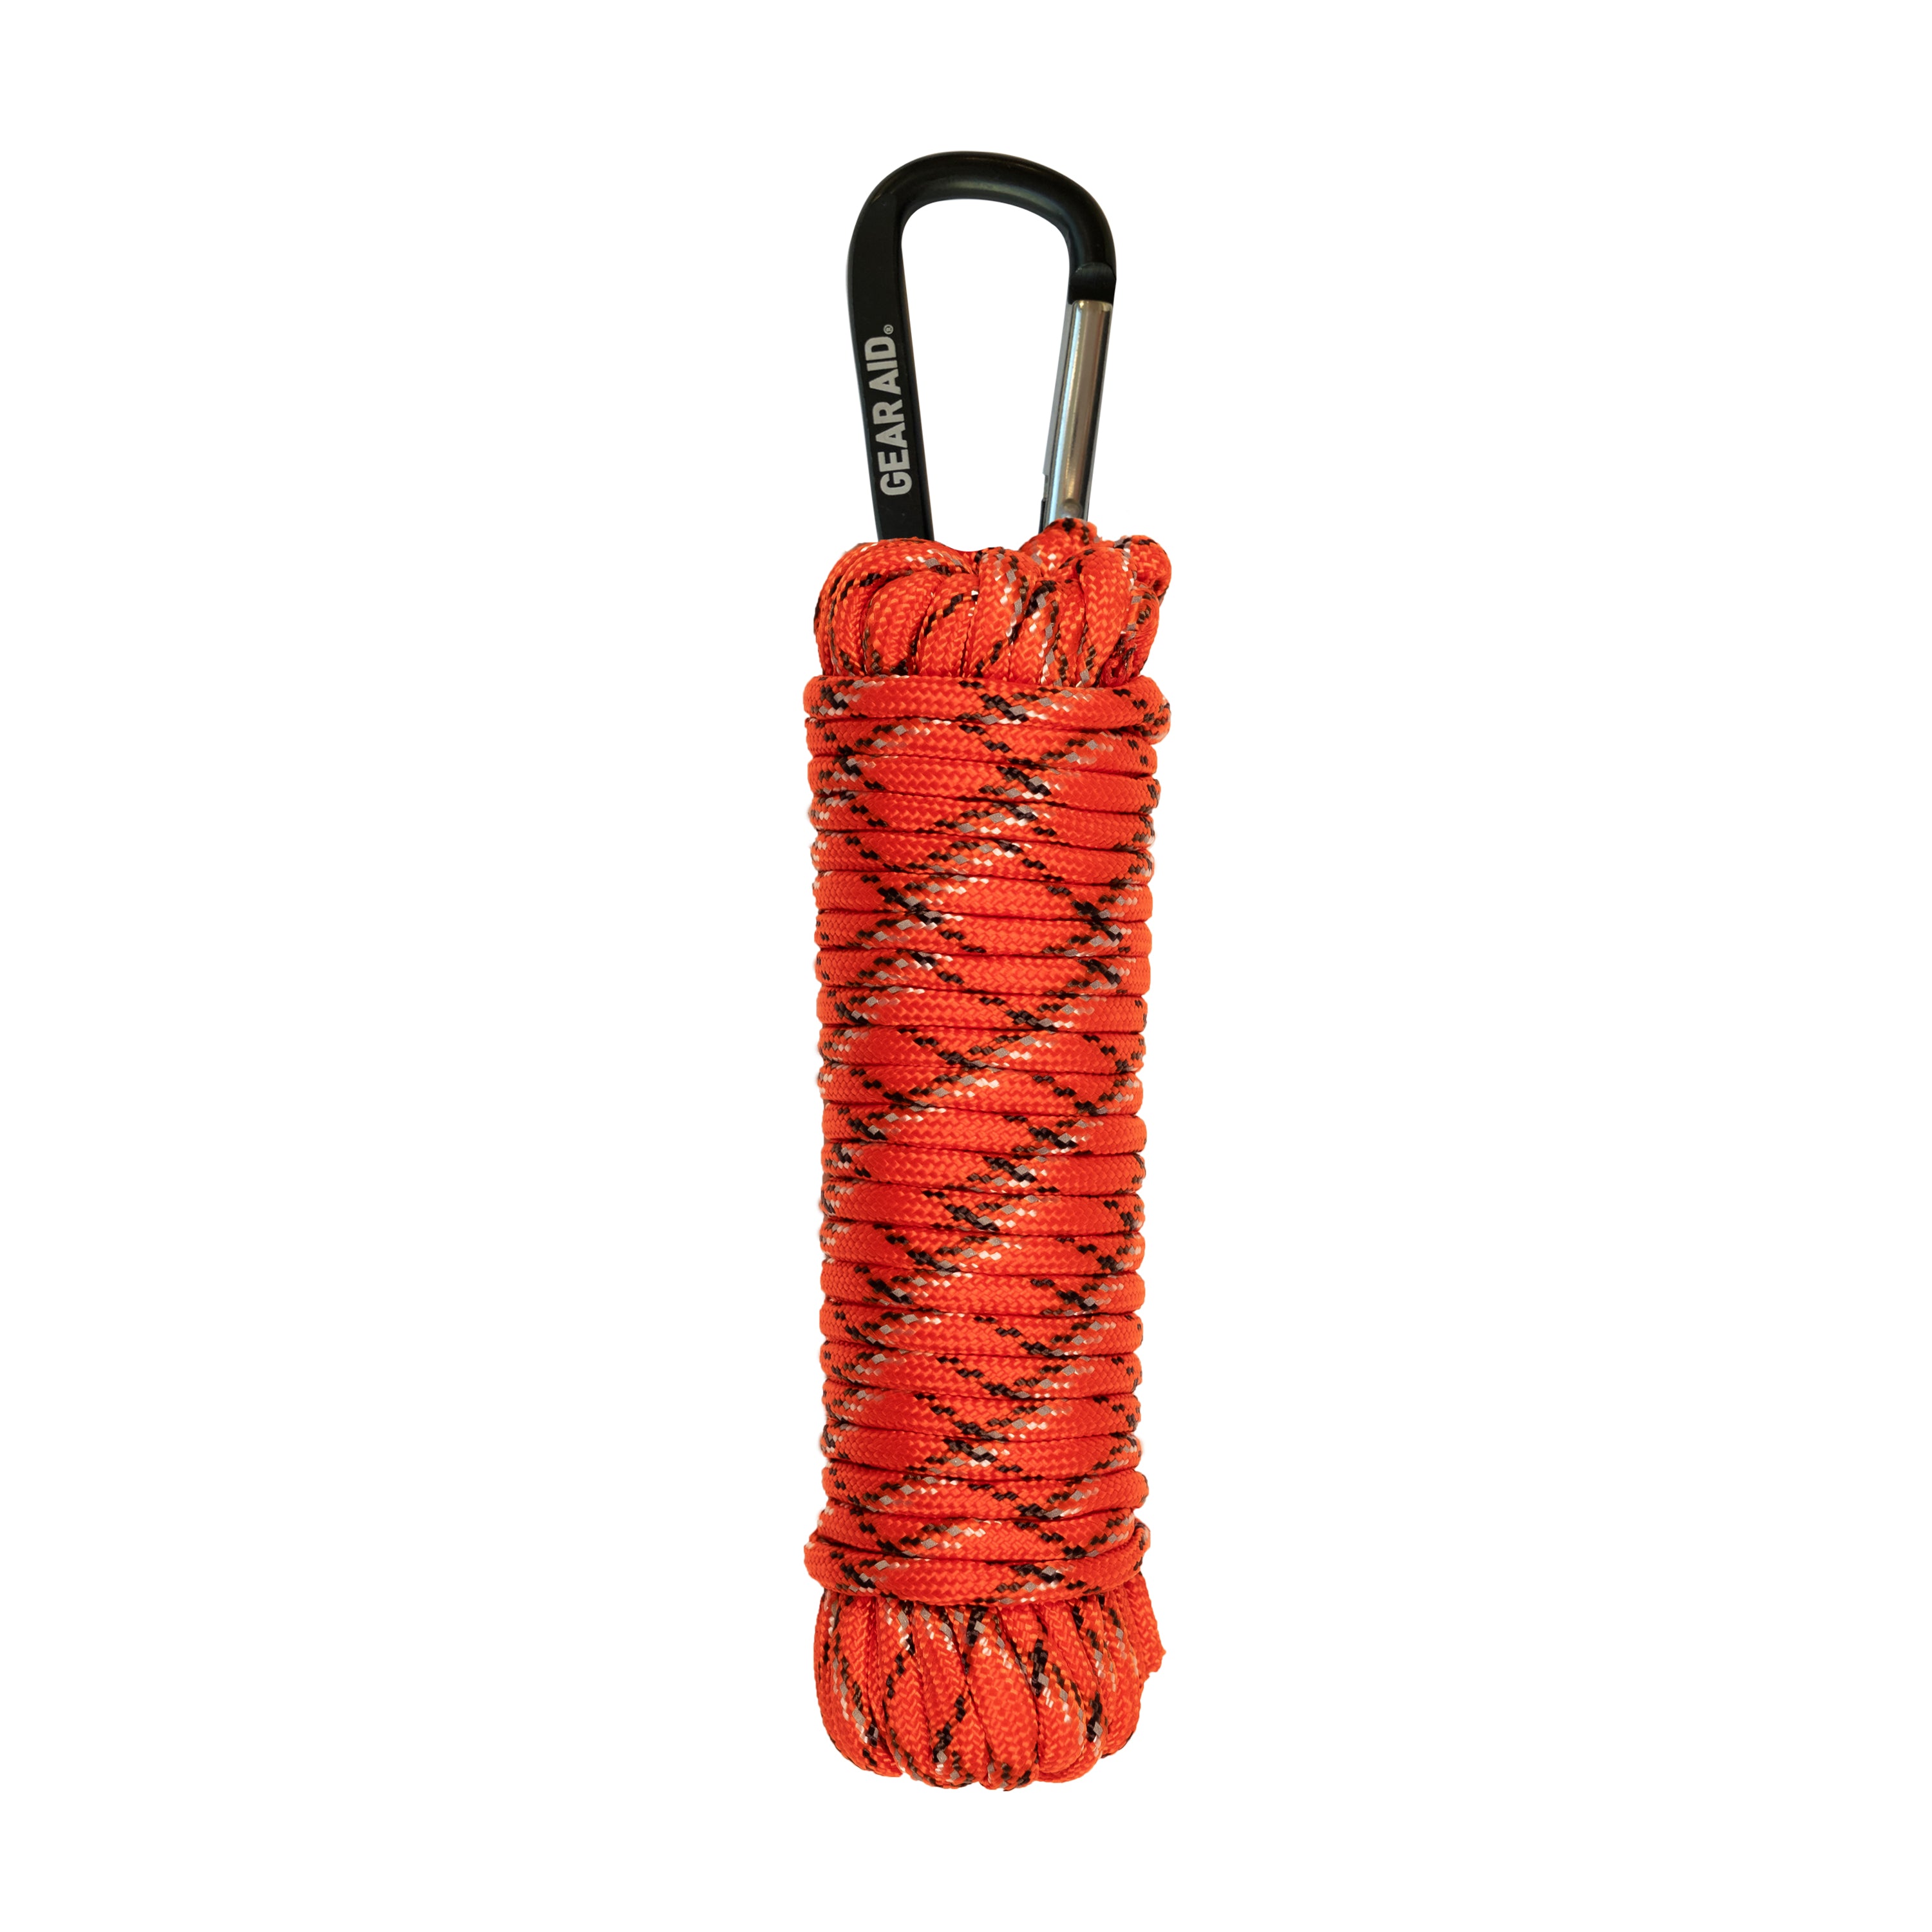 Shop Durable 550 Paracord Leashes at Woofin Amazing